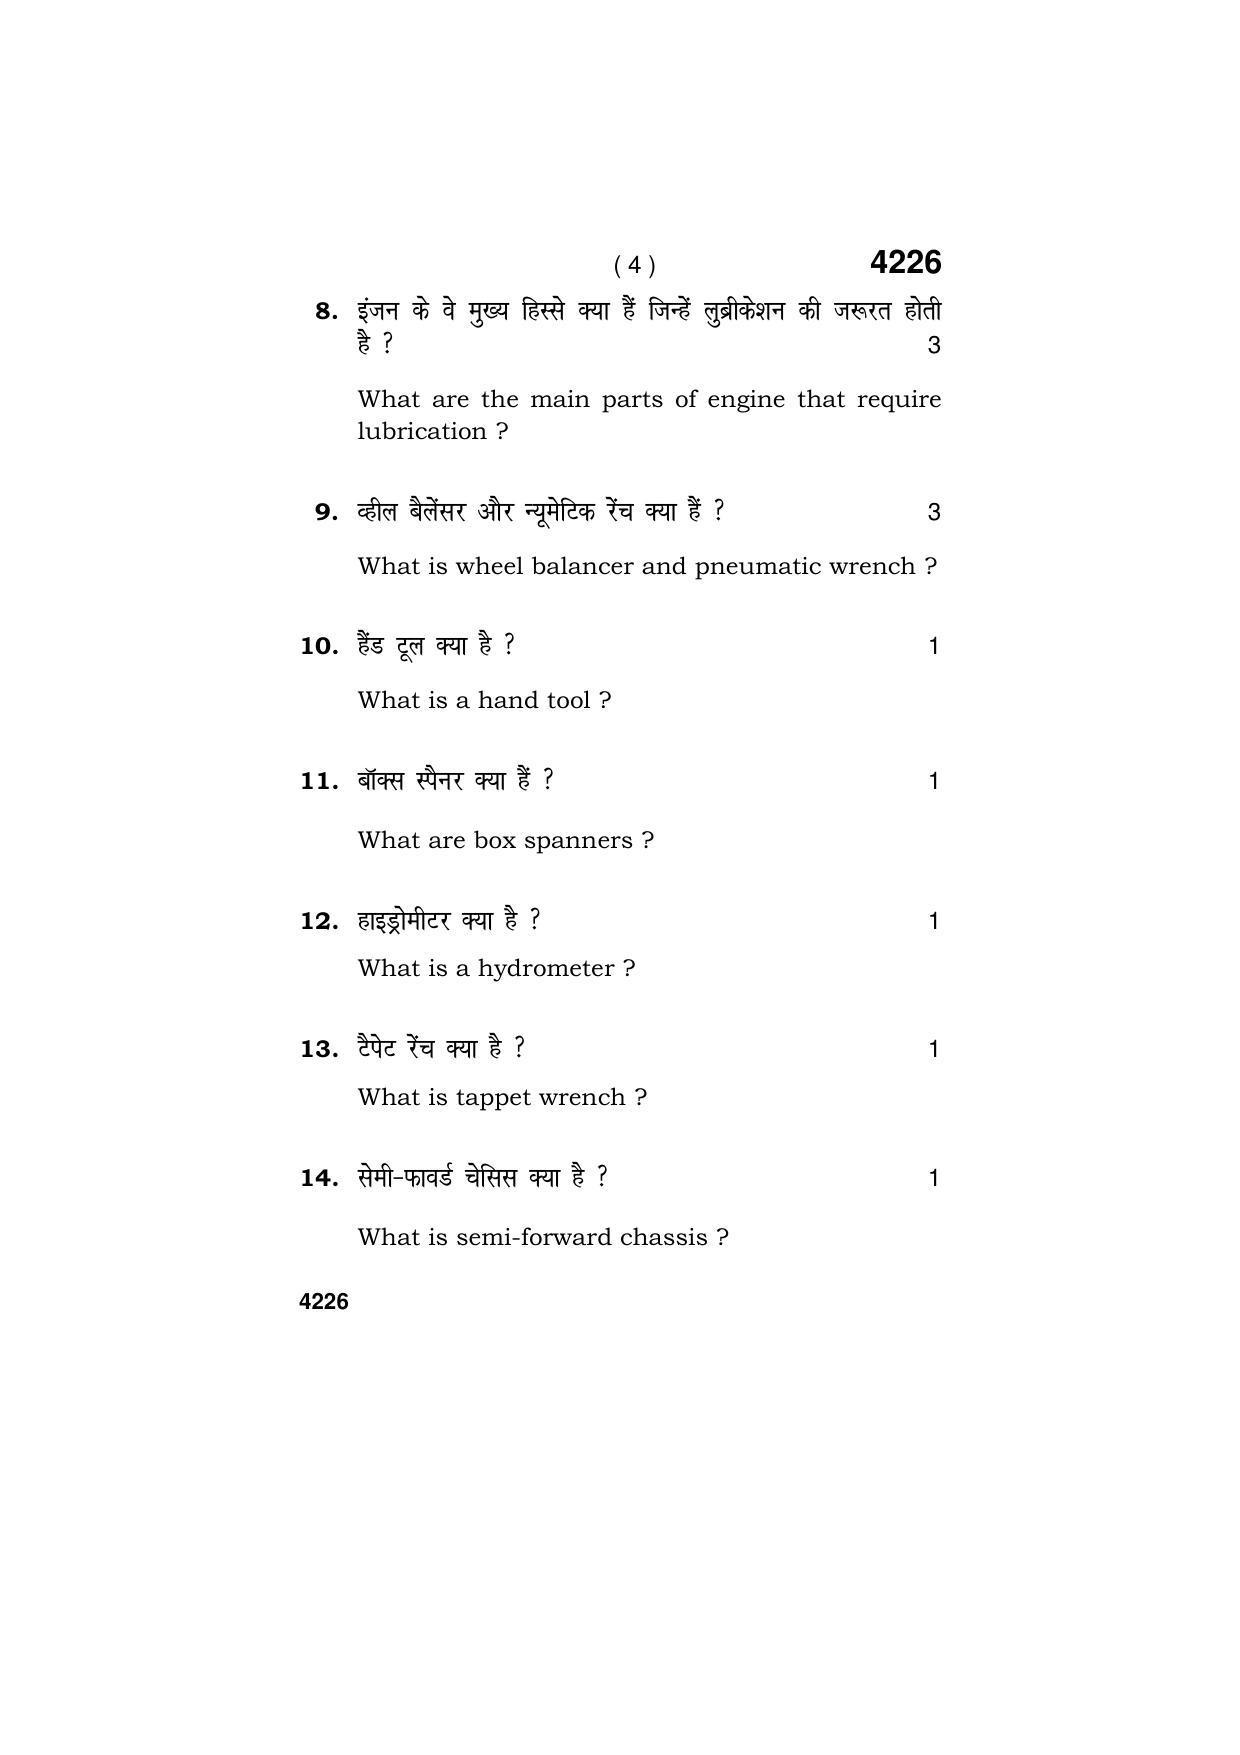 Haryana Board HBSE Class 10 Automobile 2019 Question Paper - Page 4